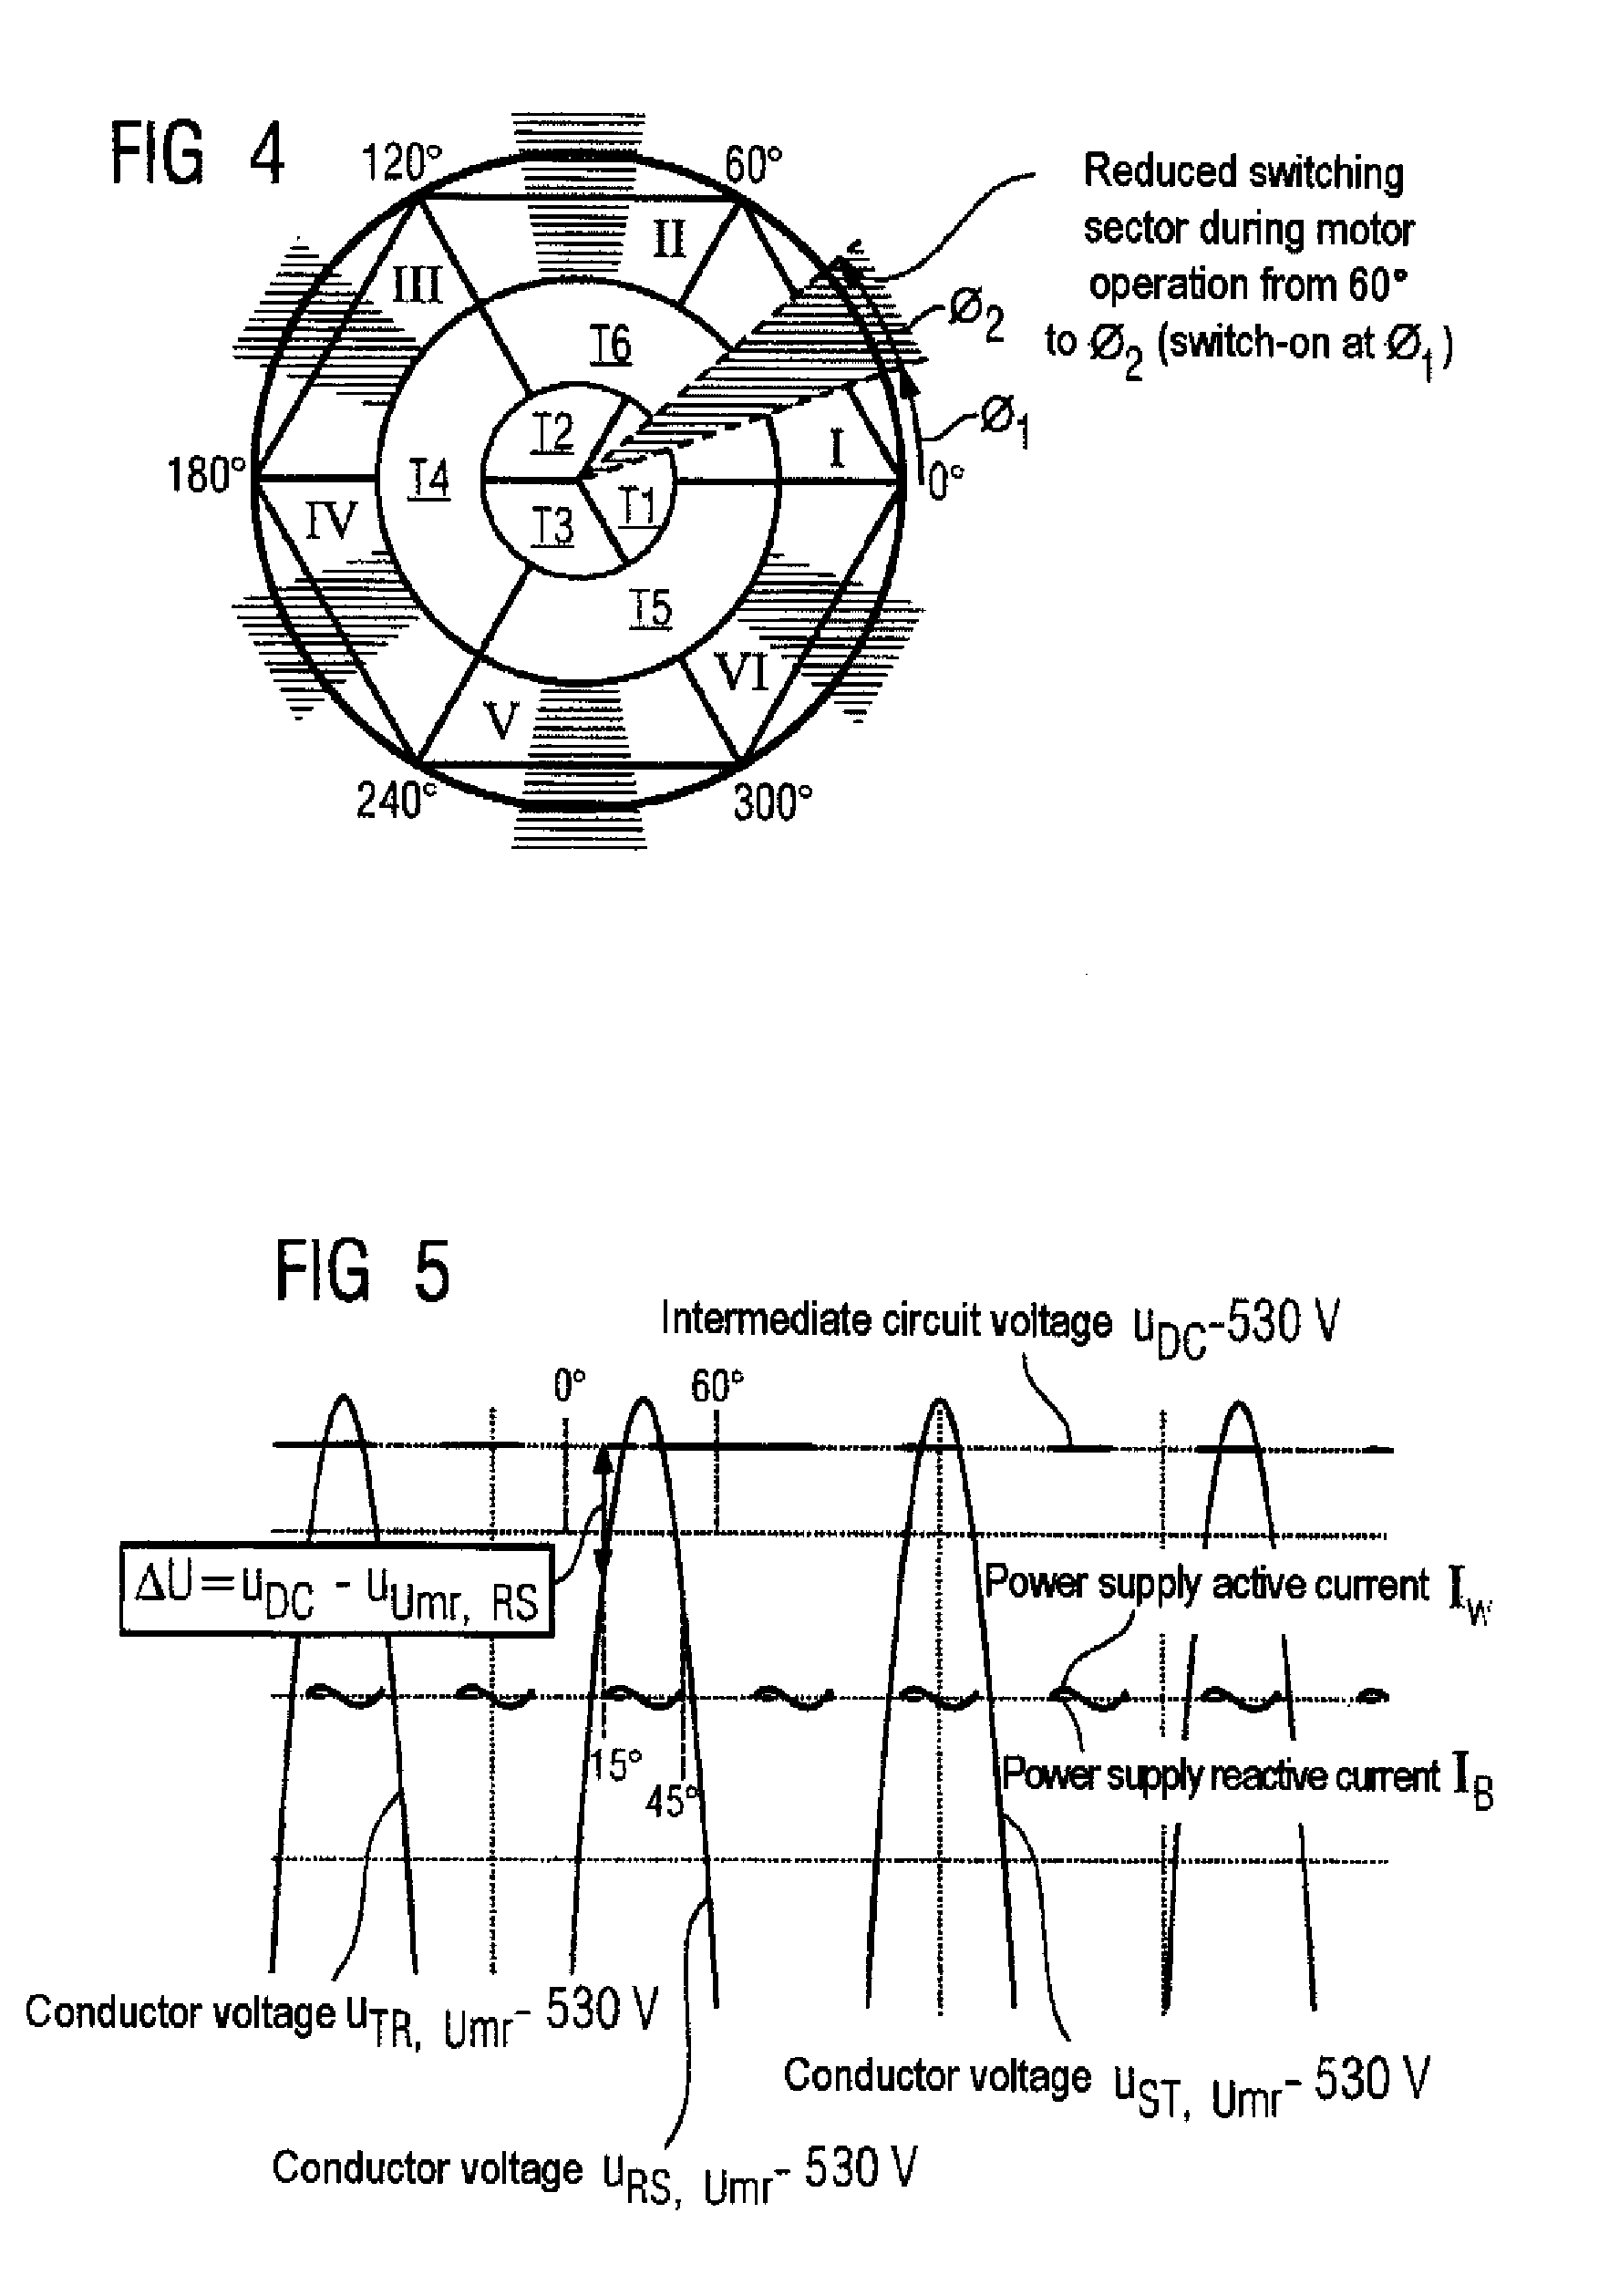 Method for reducing the reactive power requirement of a fundamental frequency clocked power supply side converter under no load and with low motor loading